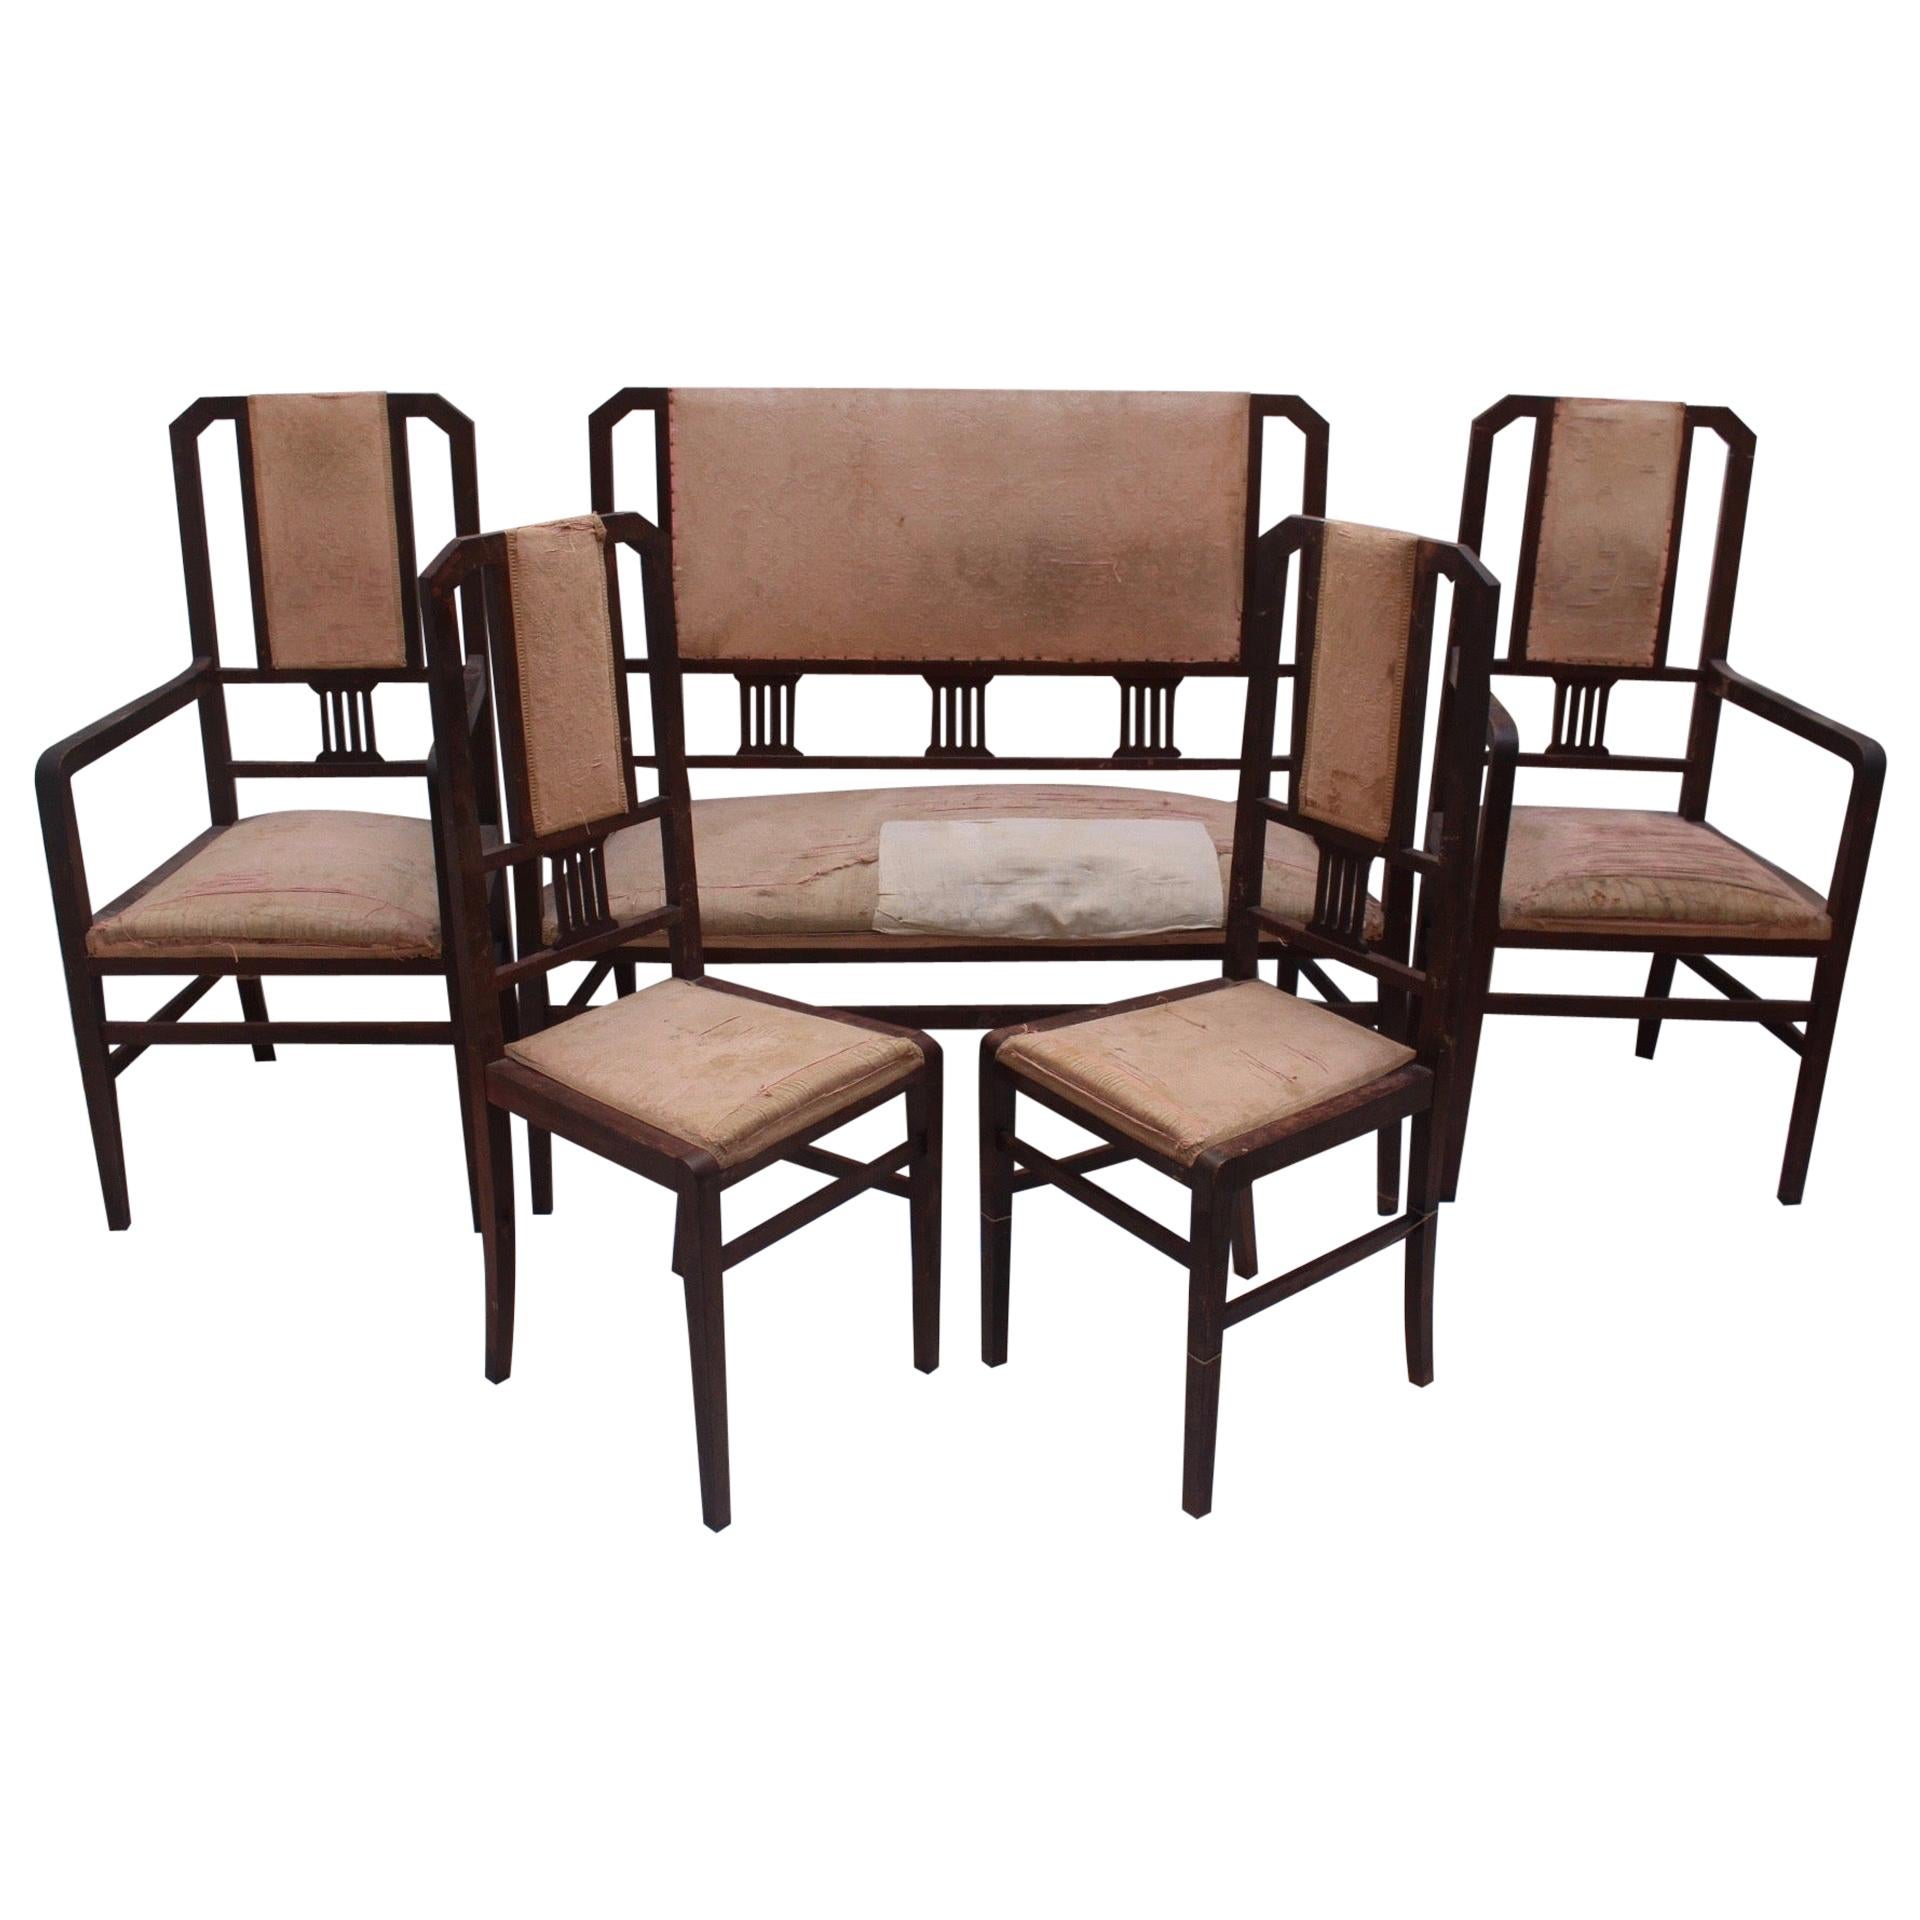 Art Deco Beech Living Room Set Settee and 4 Chairs, Spain, 1930s For Sale